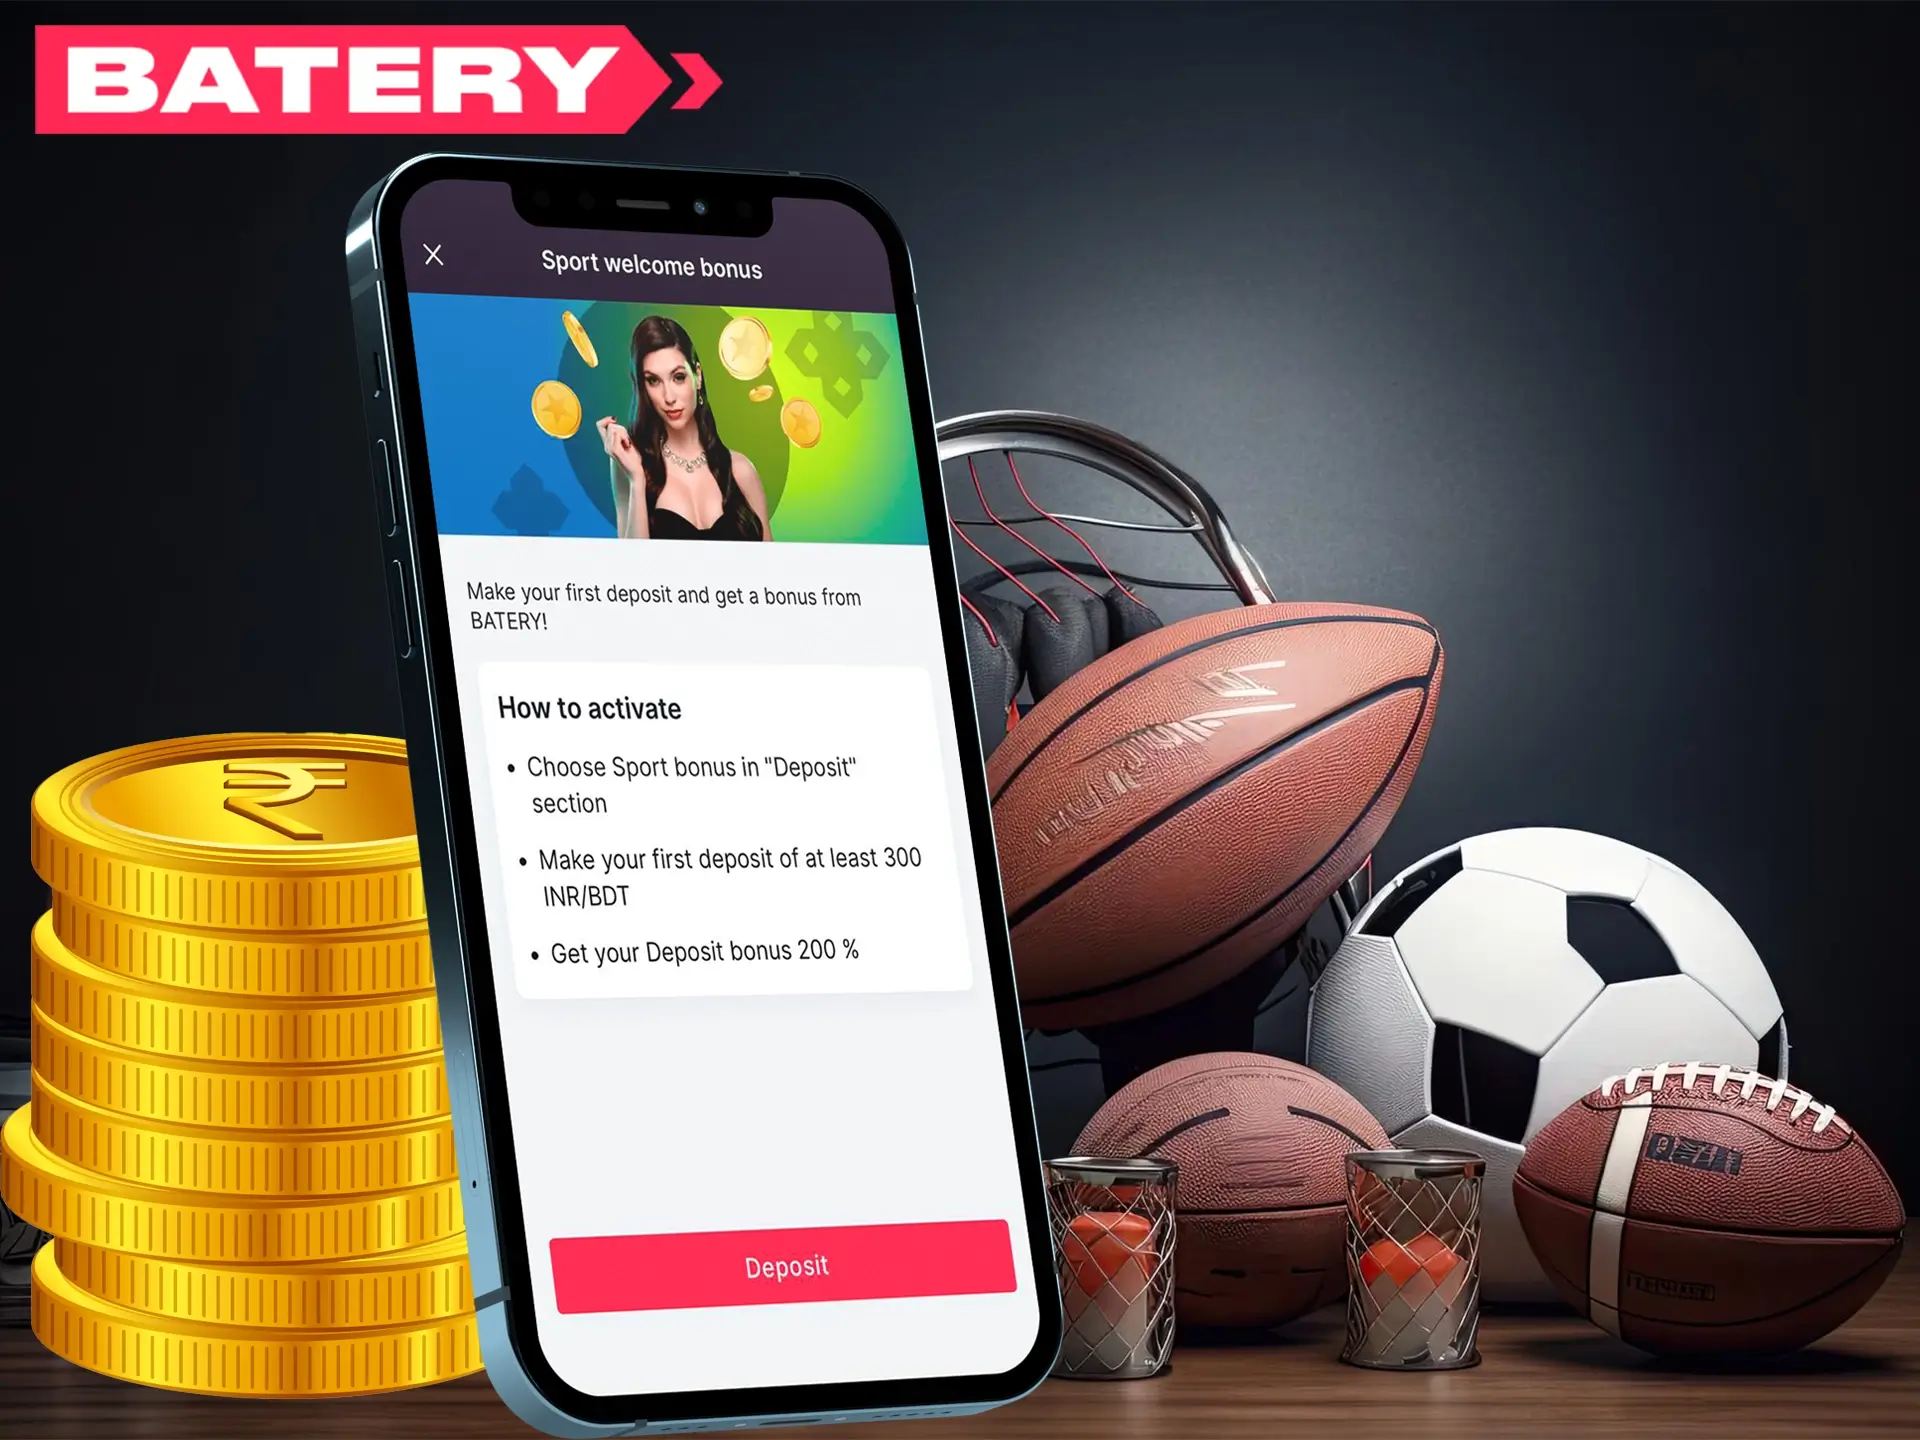 Batery offers its sports bettors a superb welcome bonus.